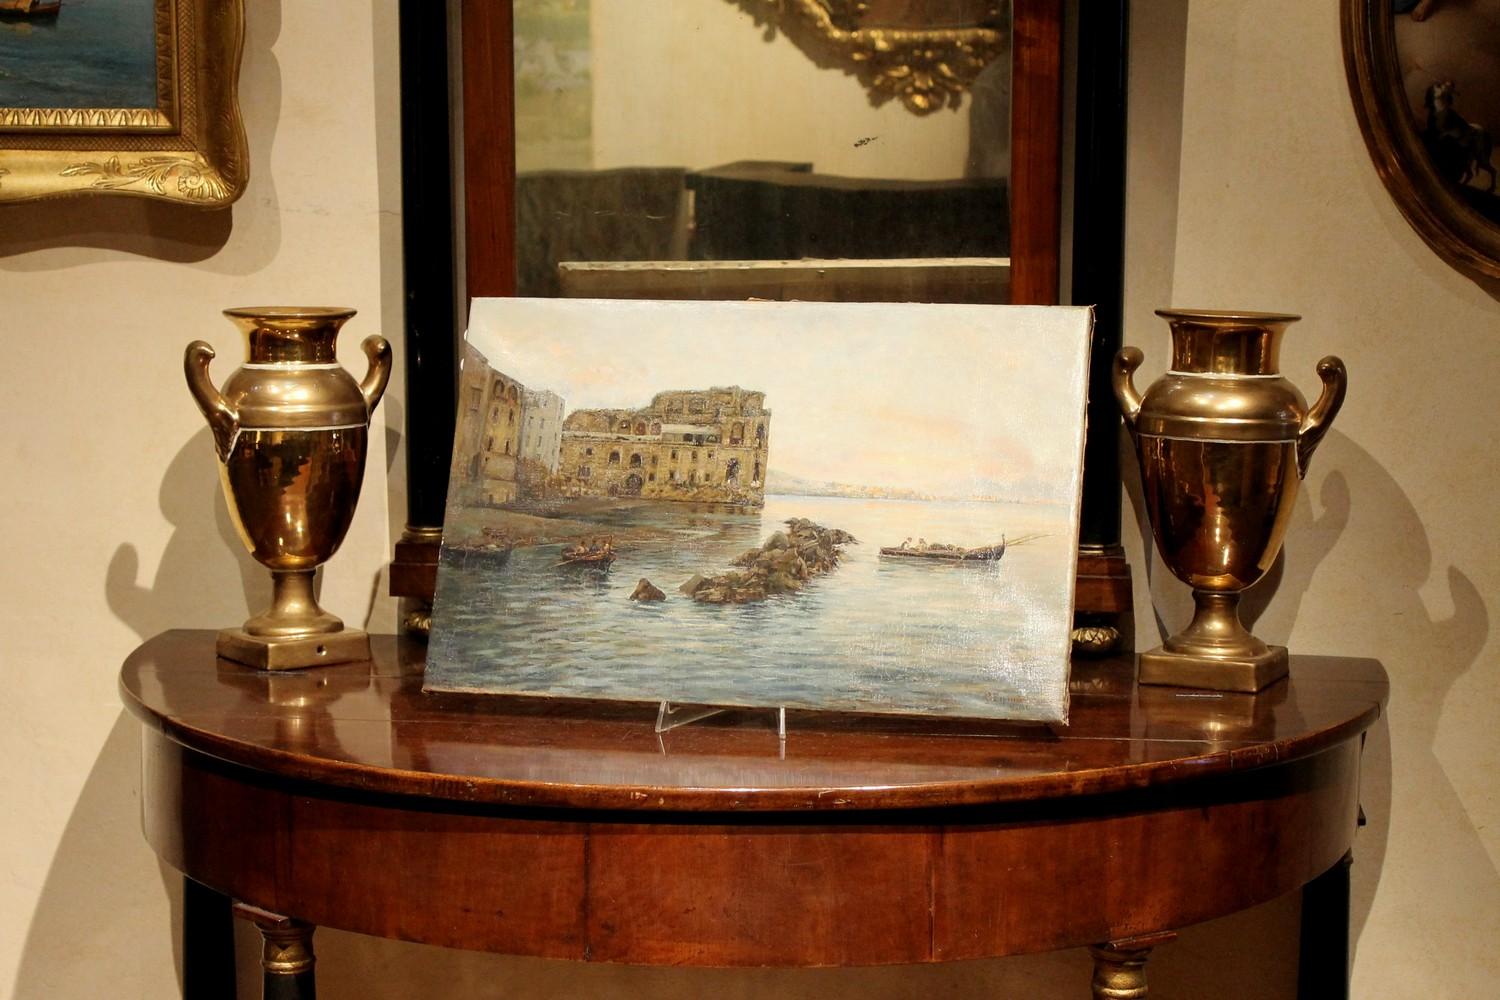 This Italian impressionist late 19th century oil on canvas painting, depicting a pleasant seascape scene with boats and architectures is signed lower right by Gaetano Esposito, a talented painter and a member of the Posillipo School.
The canvas